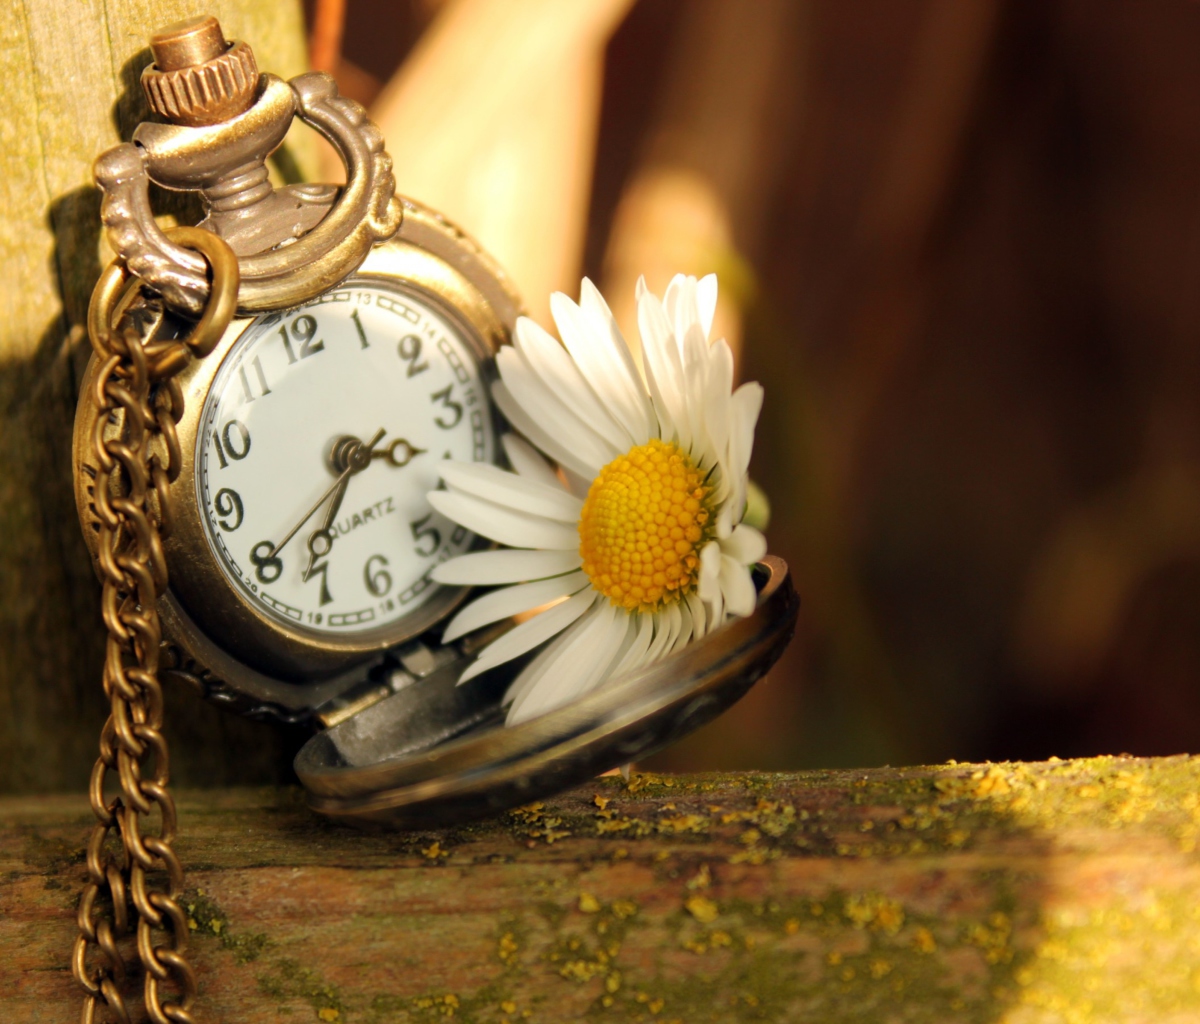 Vintage Watch And Daisy wallpaper 1200x1024